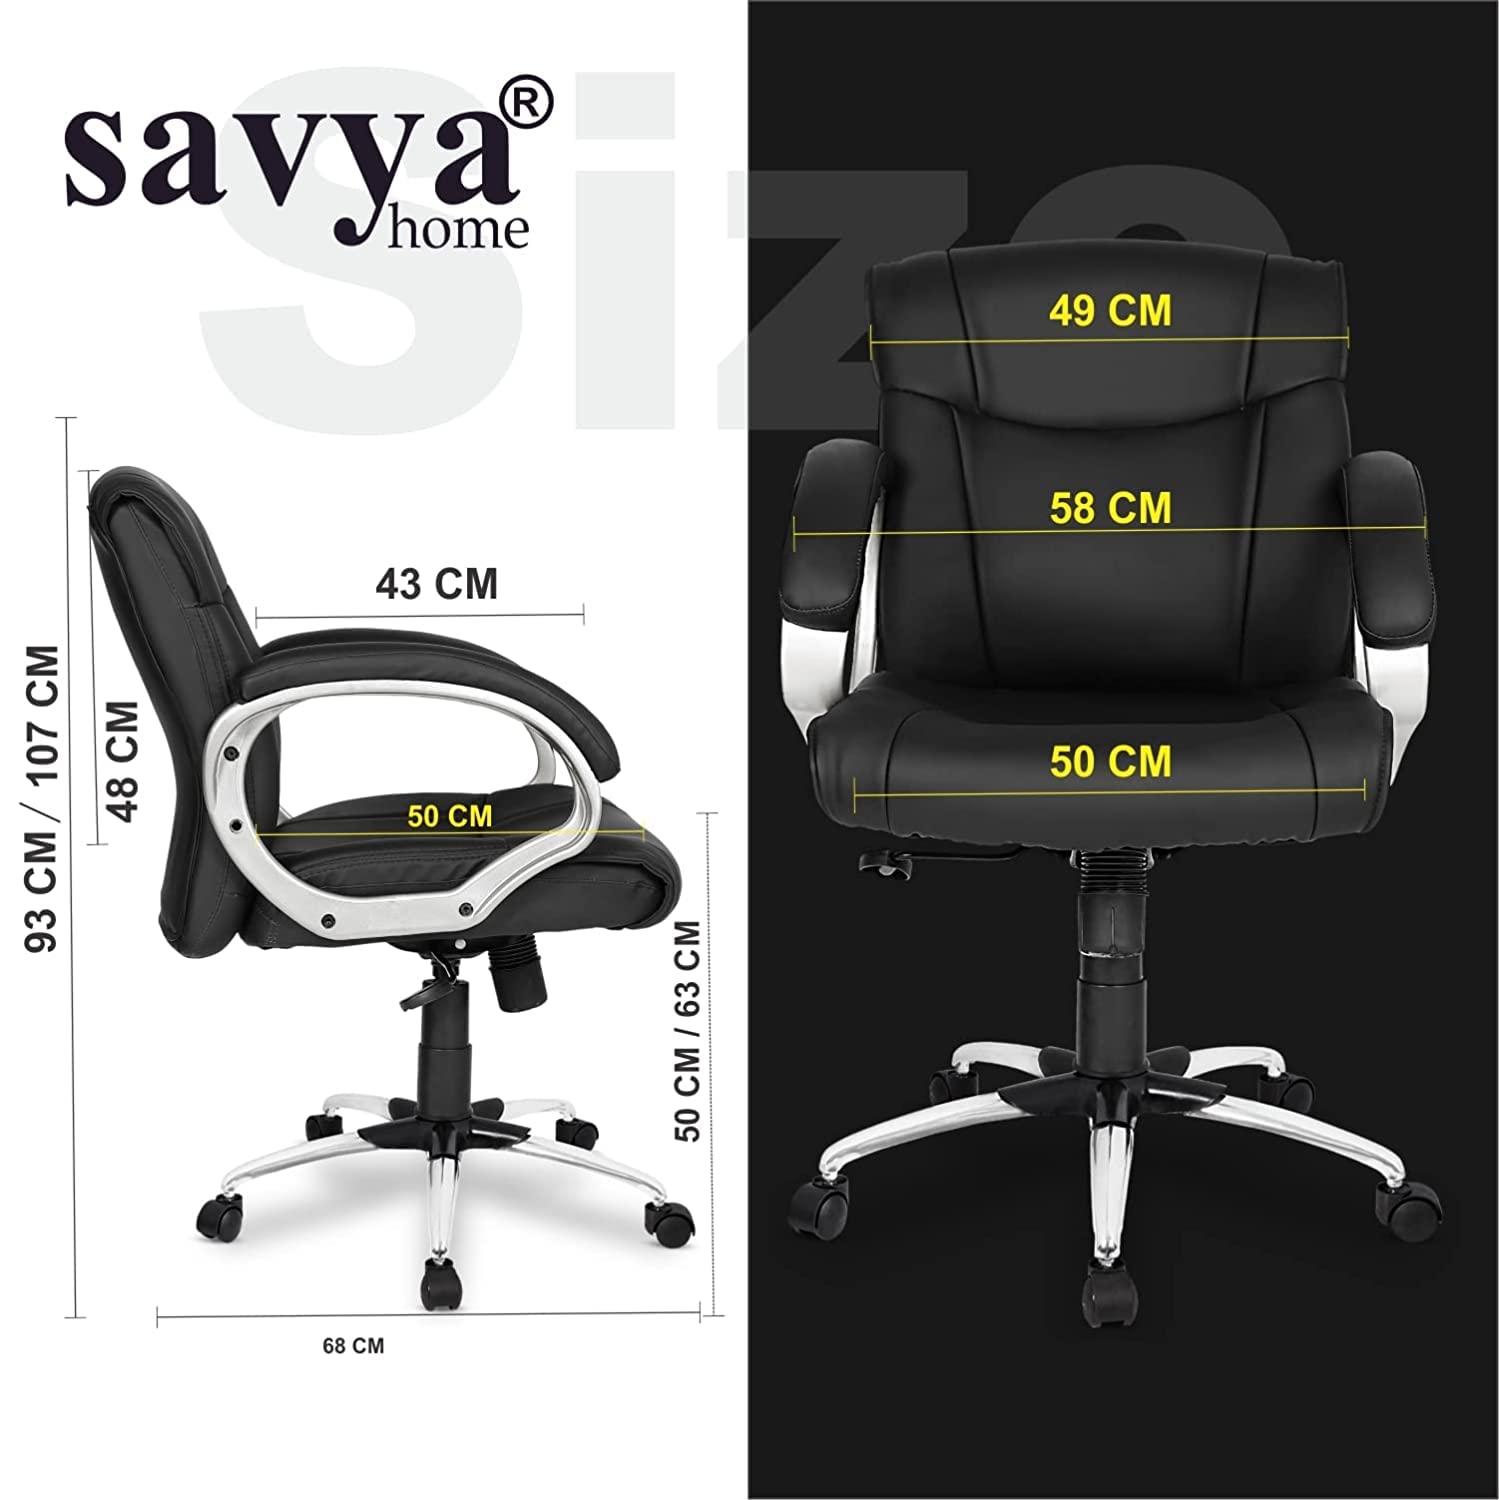 SAVYA HOME® Columbas PU Leather Executive Ergonomic Office Chair|Upholstered and Long armrest Provides Better Comfort|Tilt Feature|HIgh Back|Quilted (Black, Qty-1, PU Leather)